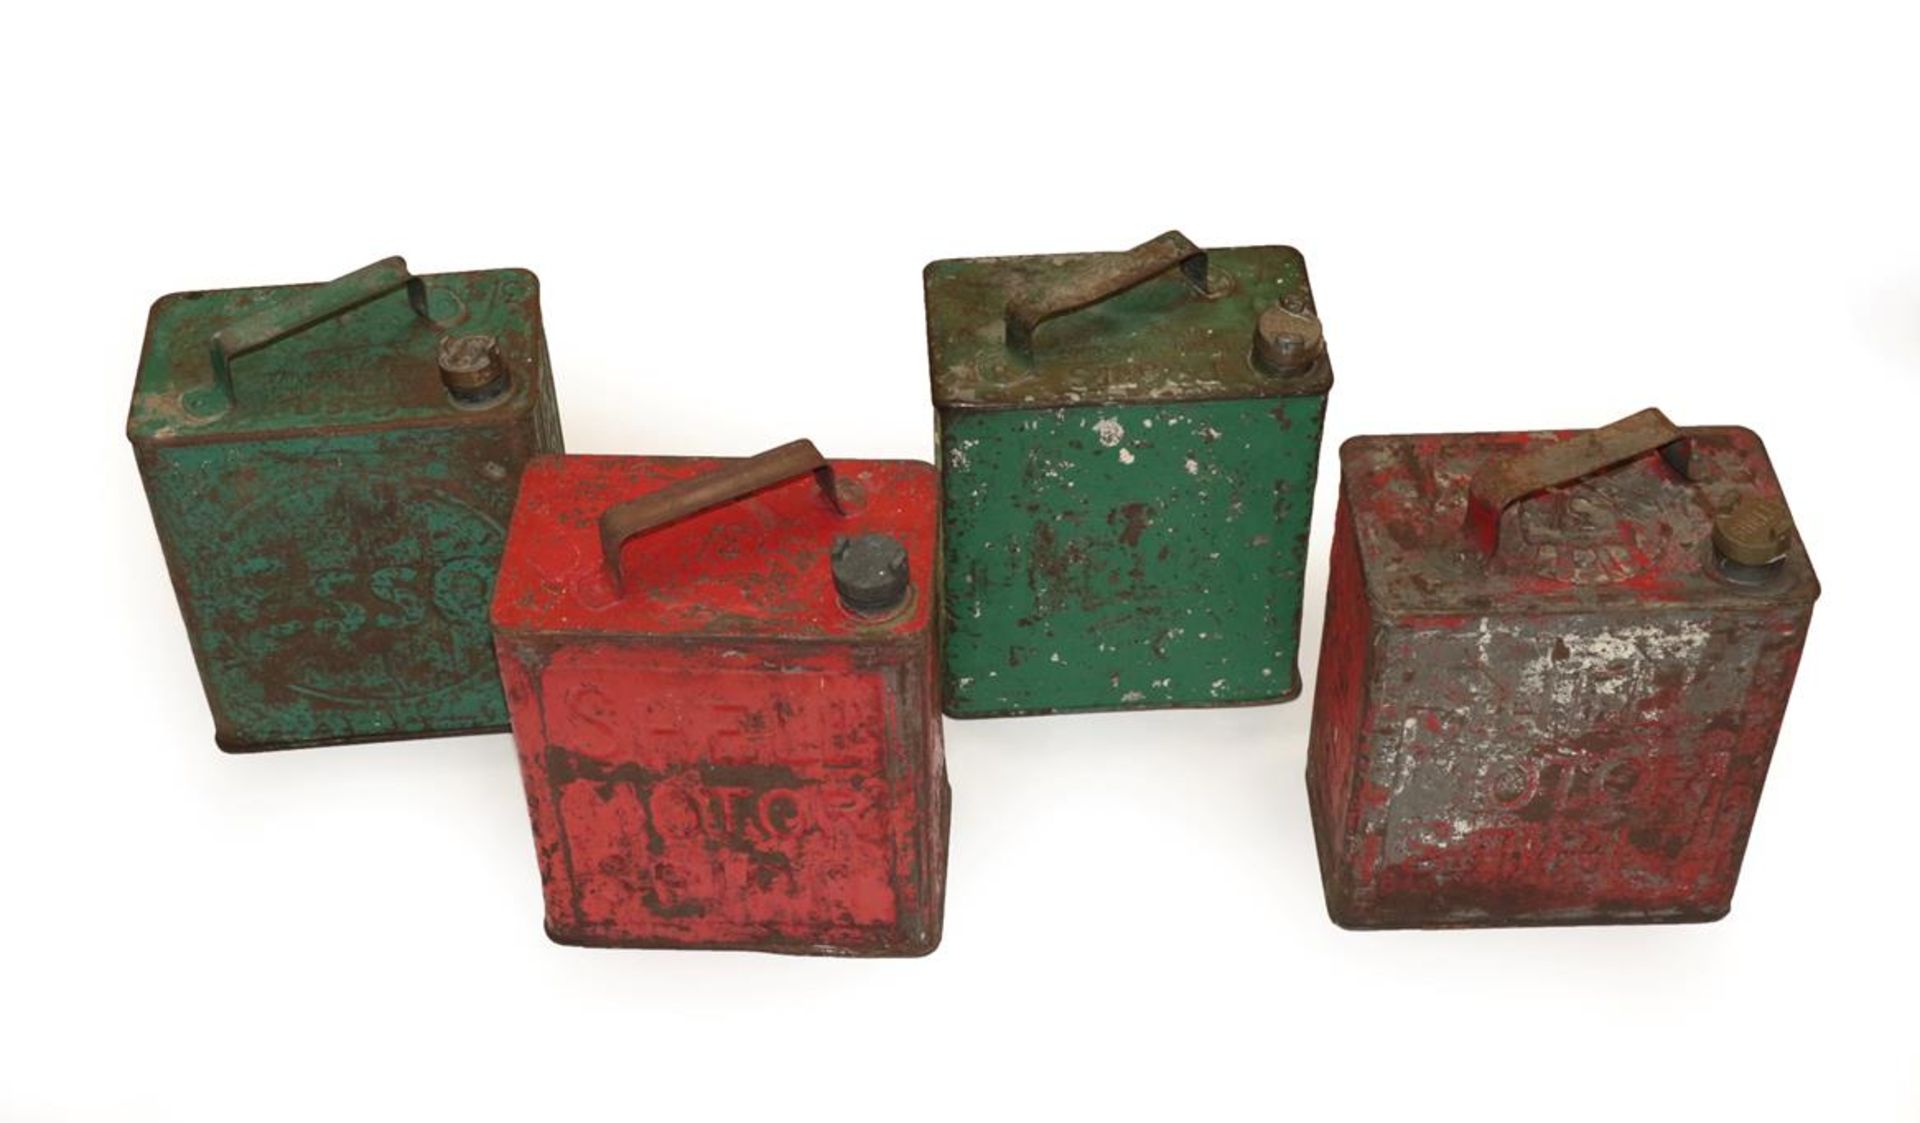 Four Vintage Metal Fuel Cans, comprising two red Shell Motor Spirit, a green Pratts, and a green